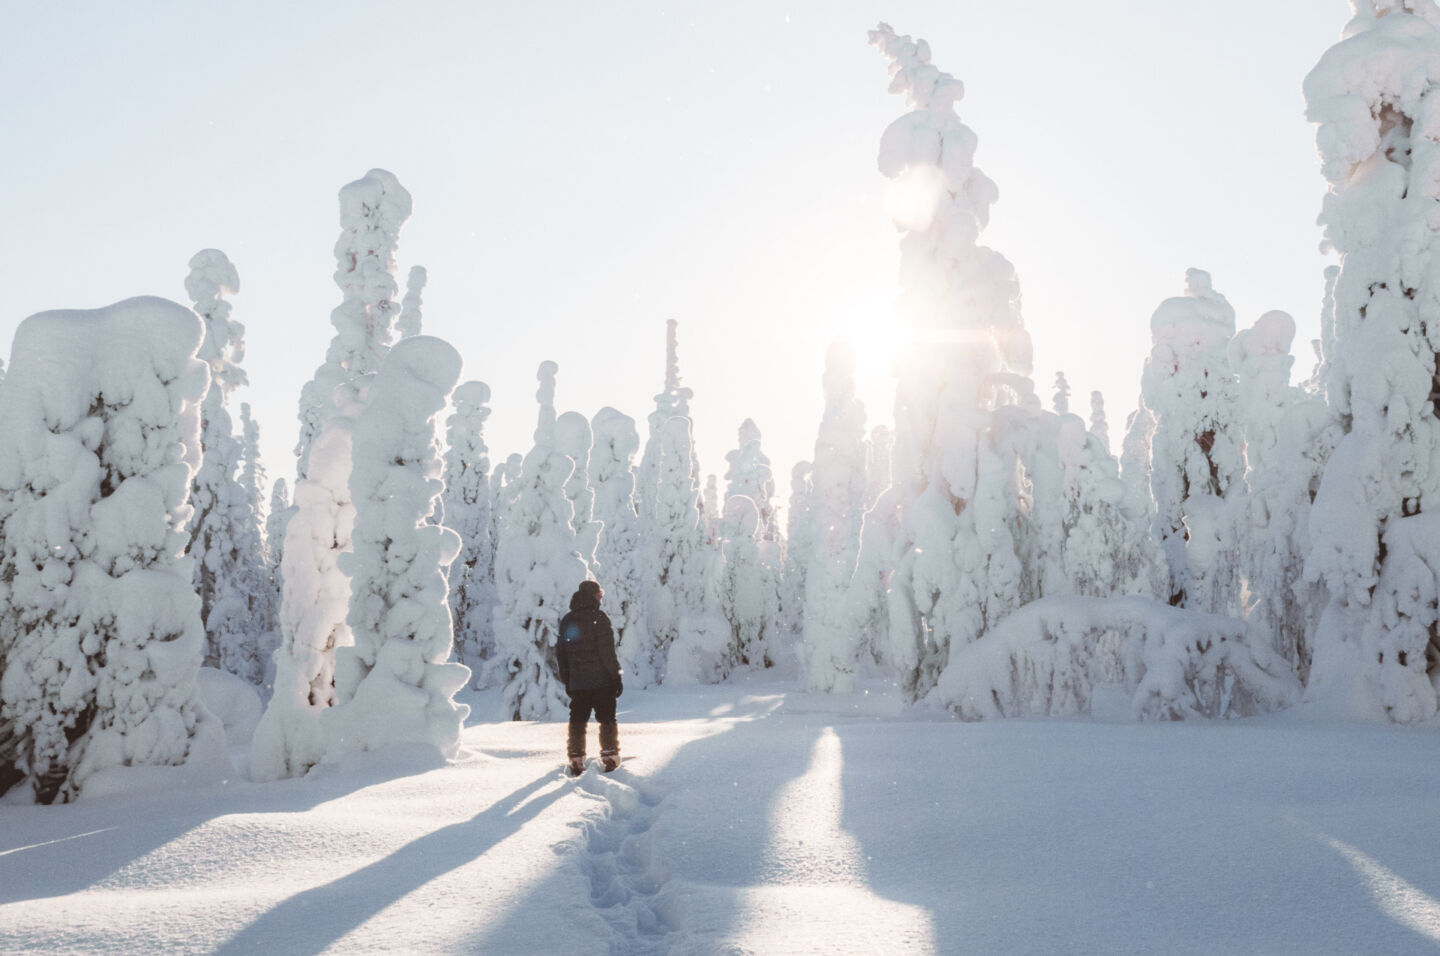 Hiking through the snowy trees in Riisitunturi National Park in Posio, a Finnish Lapland filming location